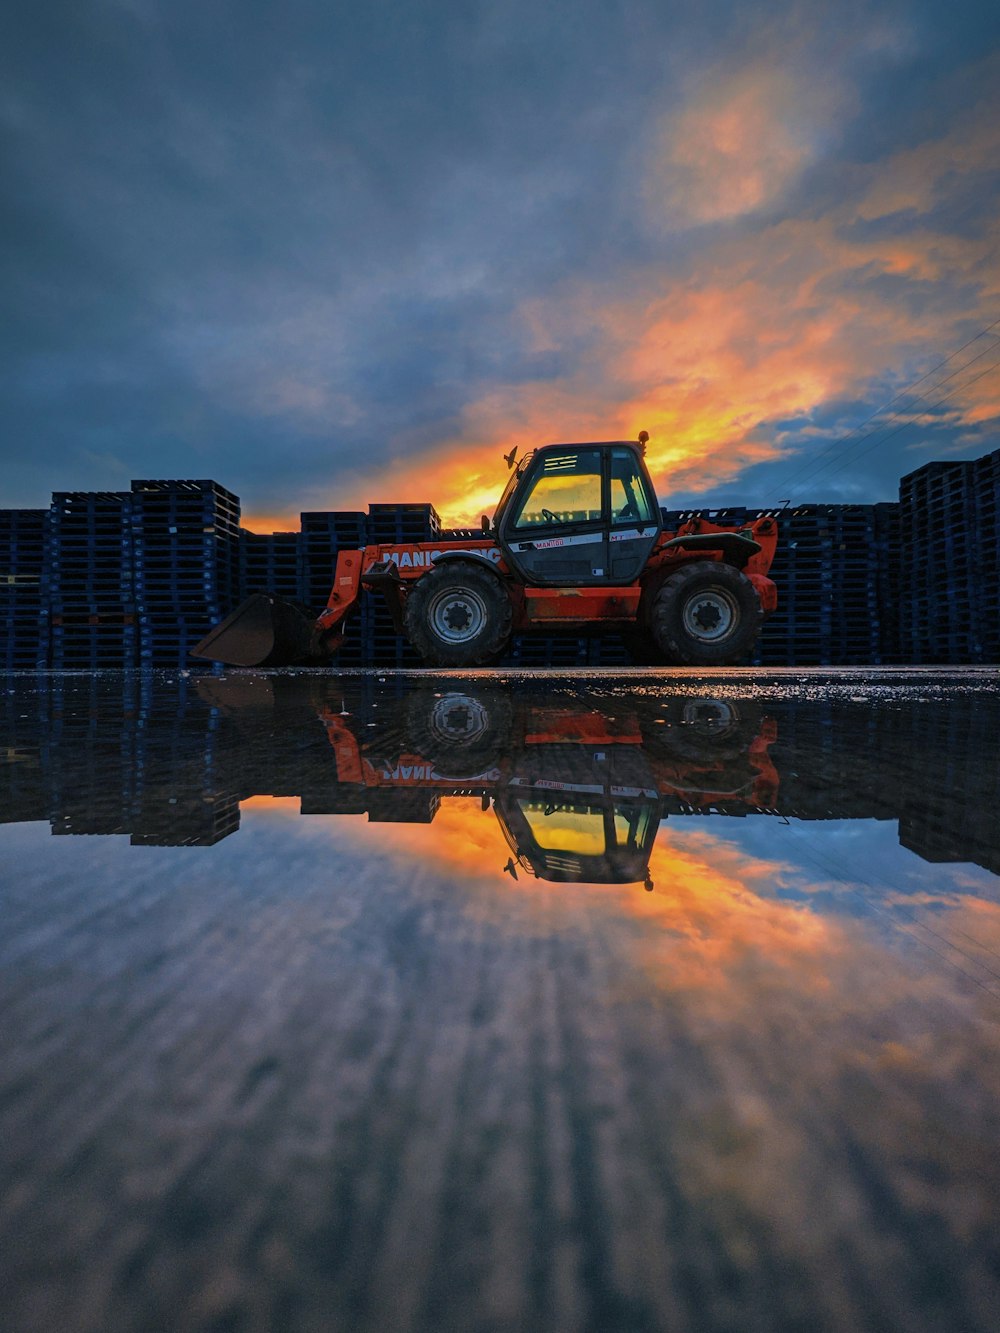 a tractor parked in front of stacks of crates